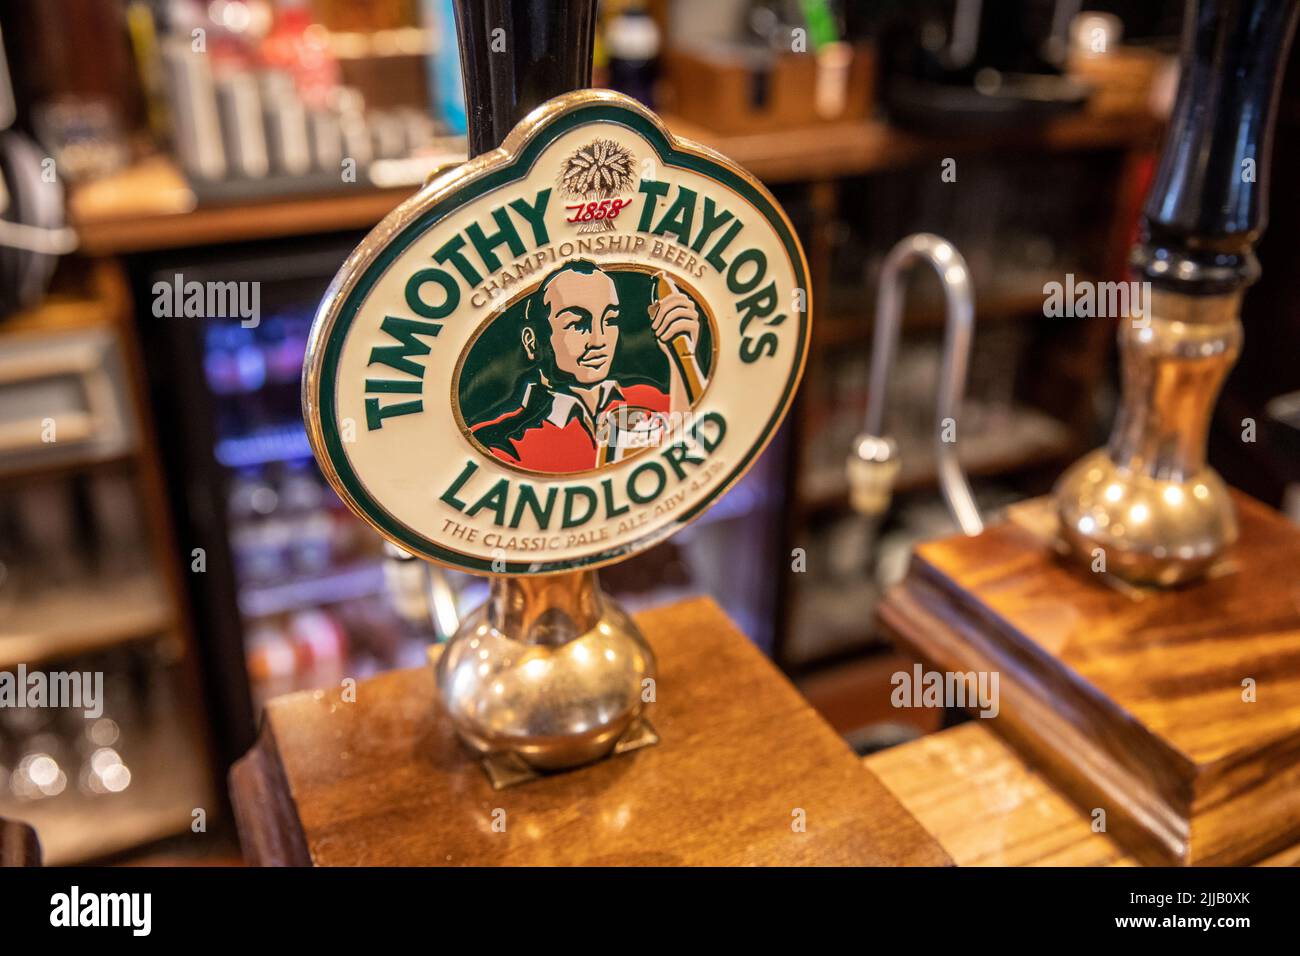 Timothy Taylors landlord Championship beer, hand pump in a Lancashire public house, England,UK Stock Photo